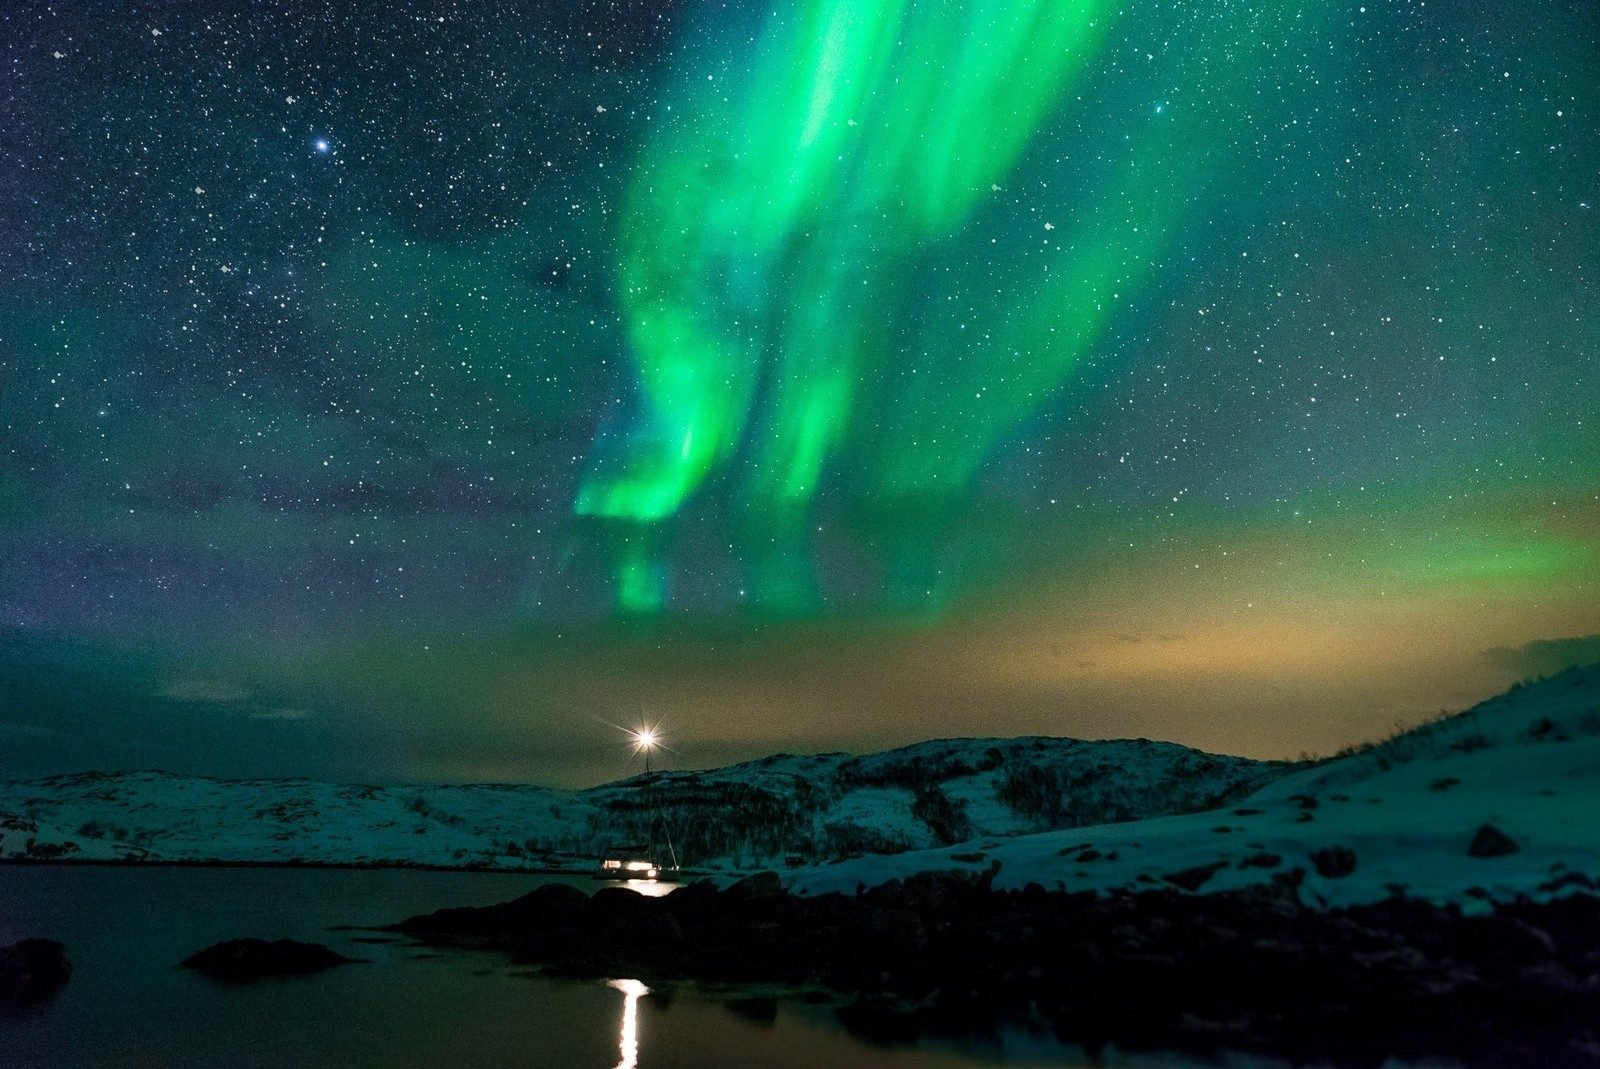 Northern Lights shining above a snowy fjord.